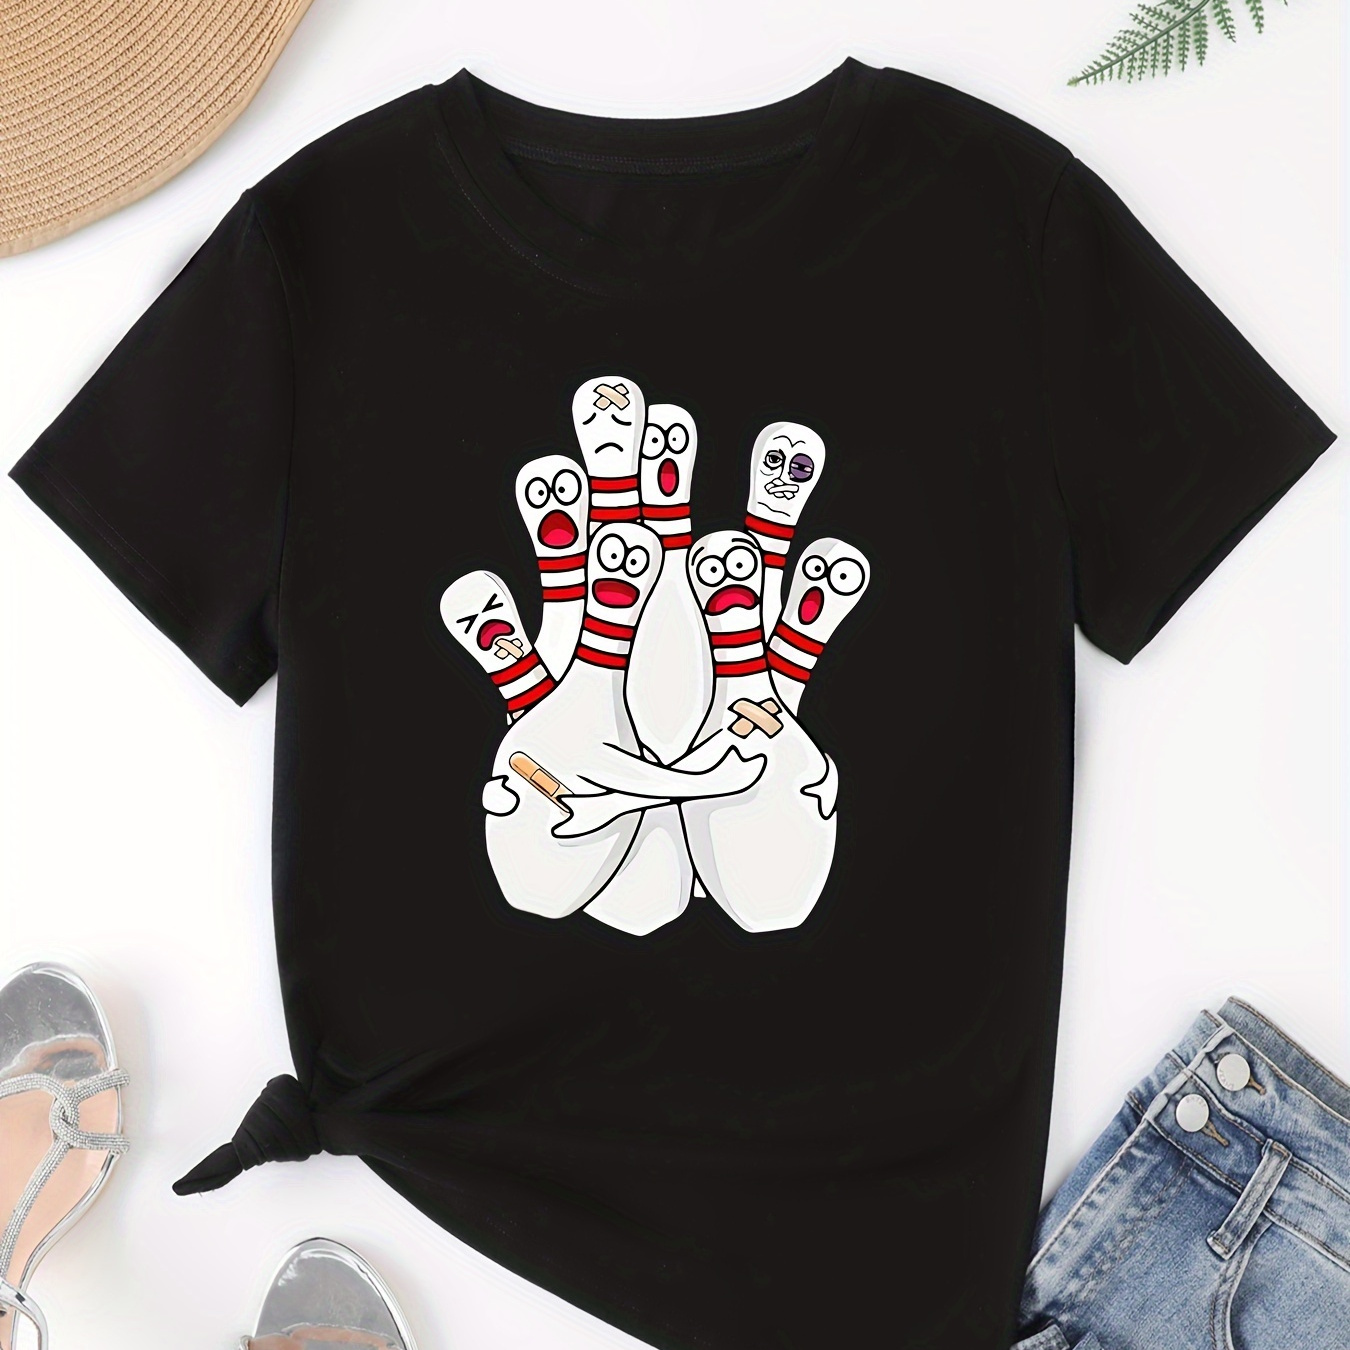 

Cartoon Bowling Print T-shirt, Short Sleeve Crew Neck Casual Top For Summer & Spring, Women's Clothing